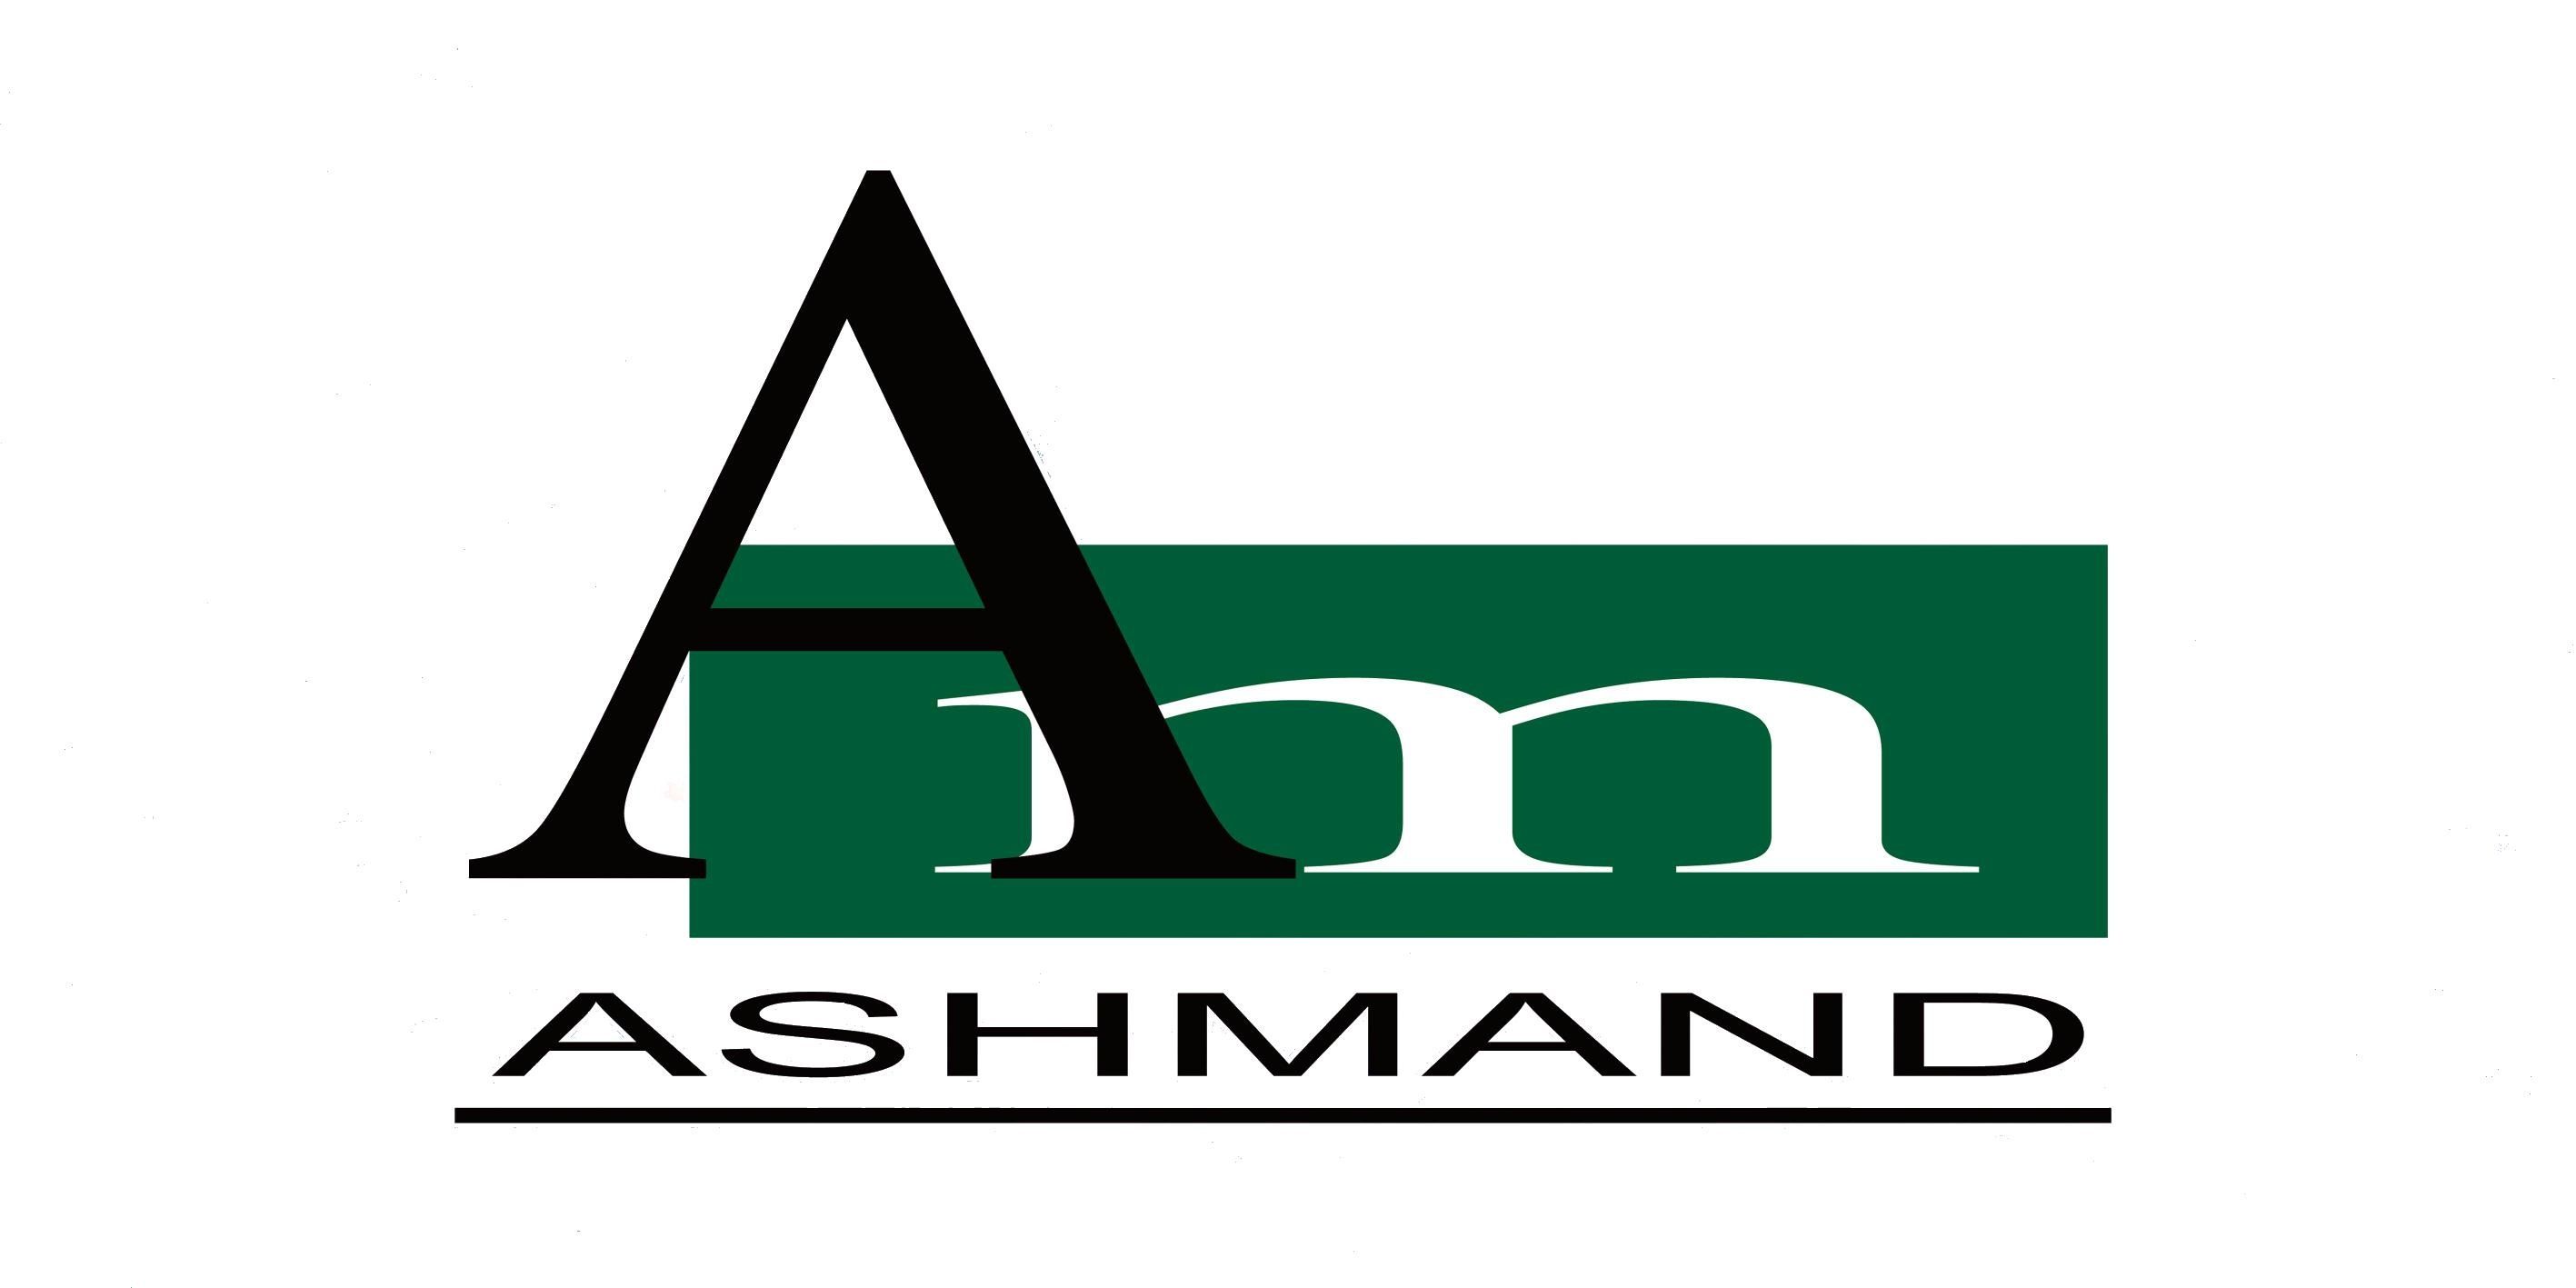 International Co for Trading and Economic Development (Ashmand)